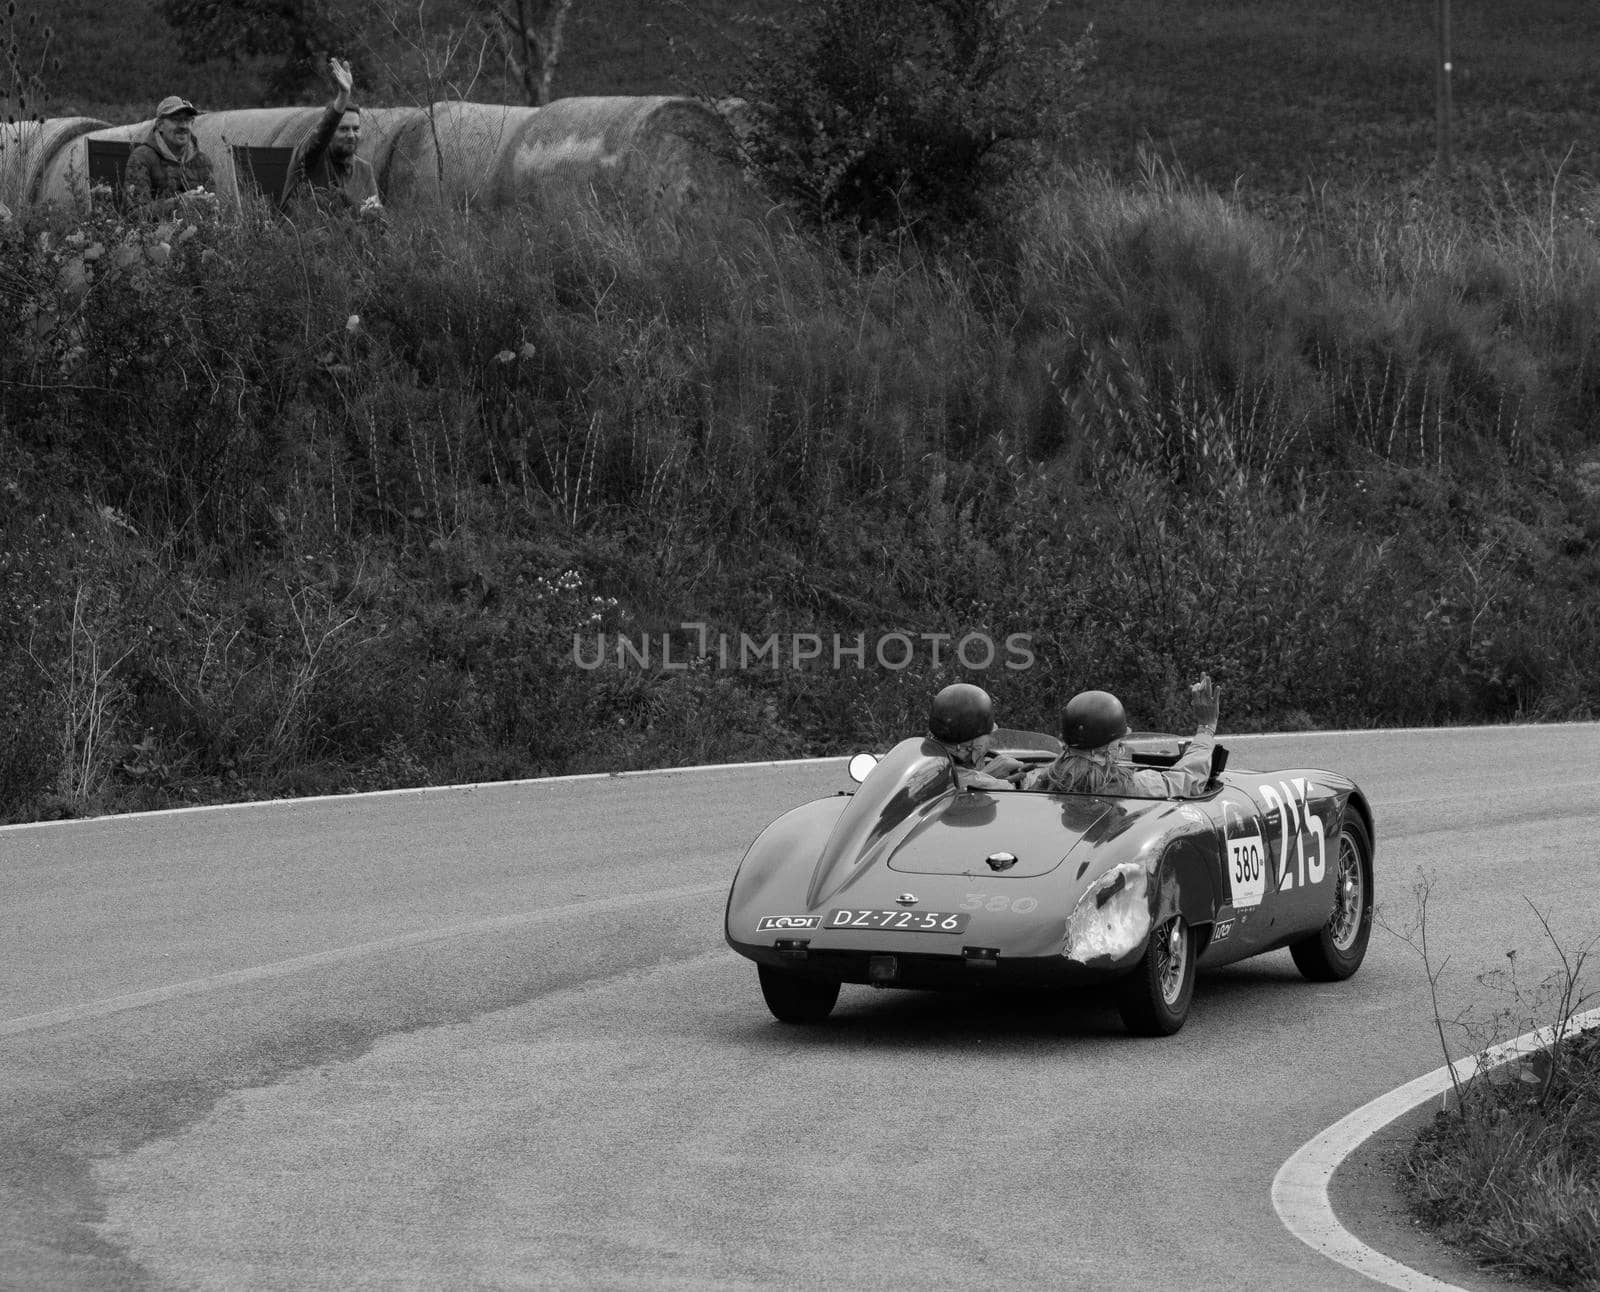 CAGLI , ITALY - OTT 24 - 2020 : OSCA S187/750 1956 on an old racing car in rally Mille Miglia 2020 the famous italian historical race (1927-1957